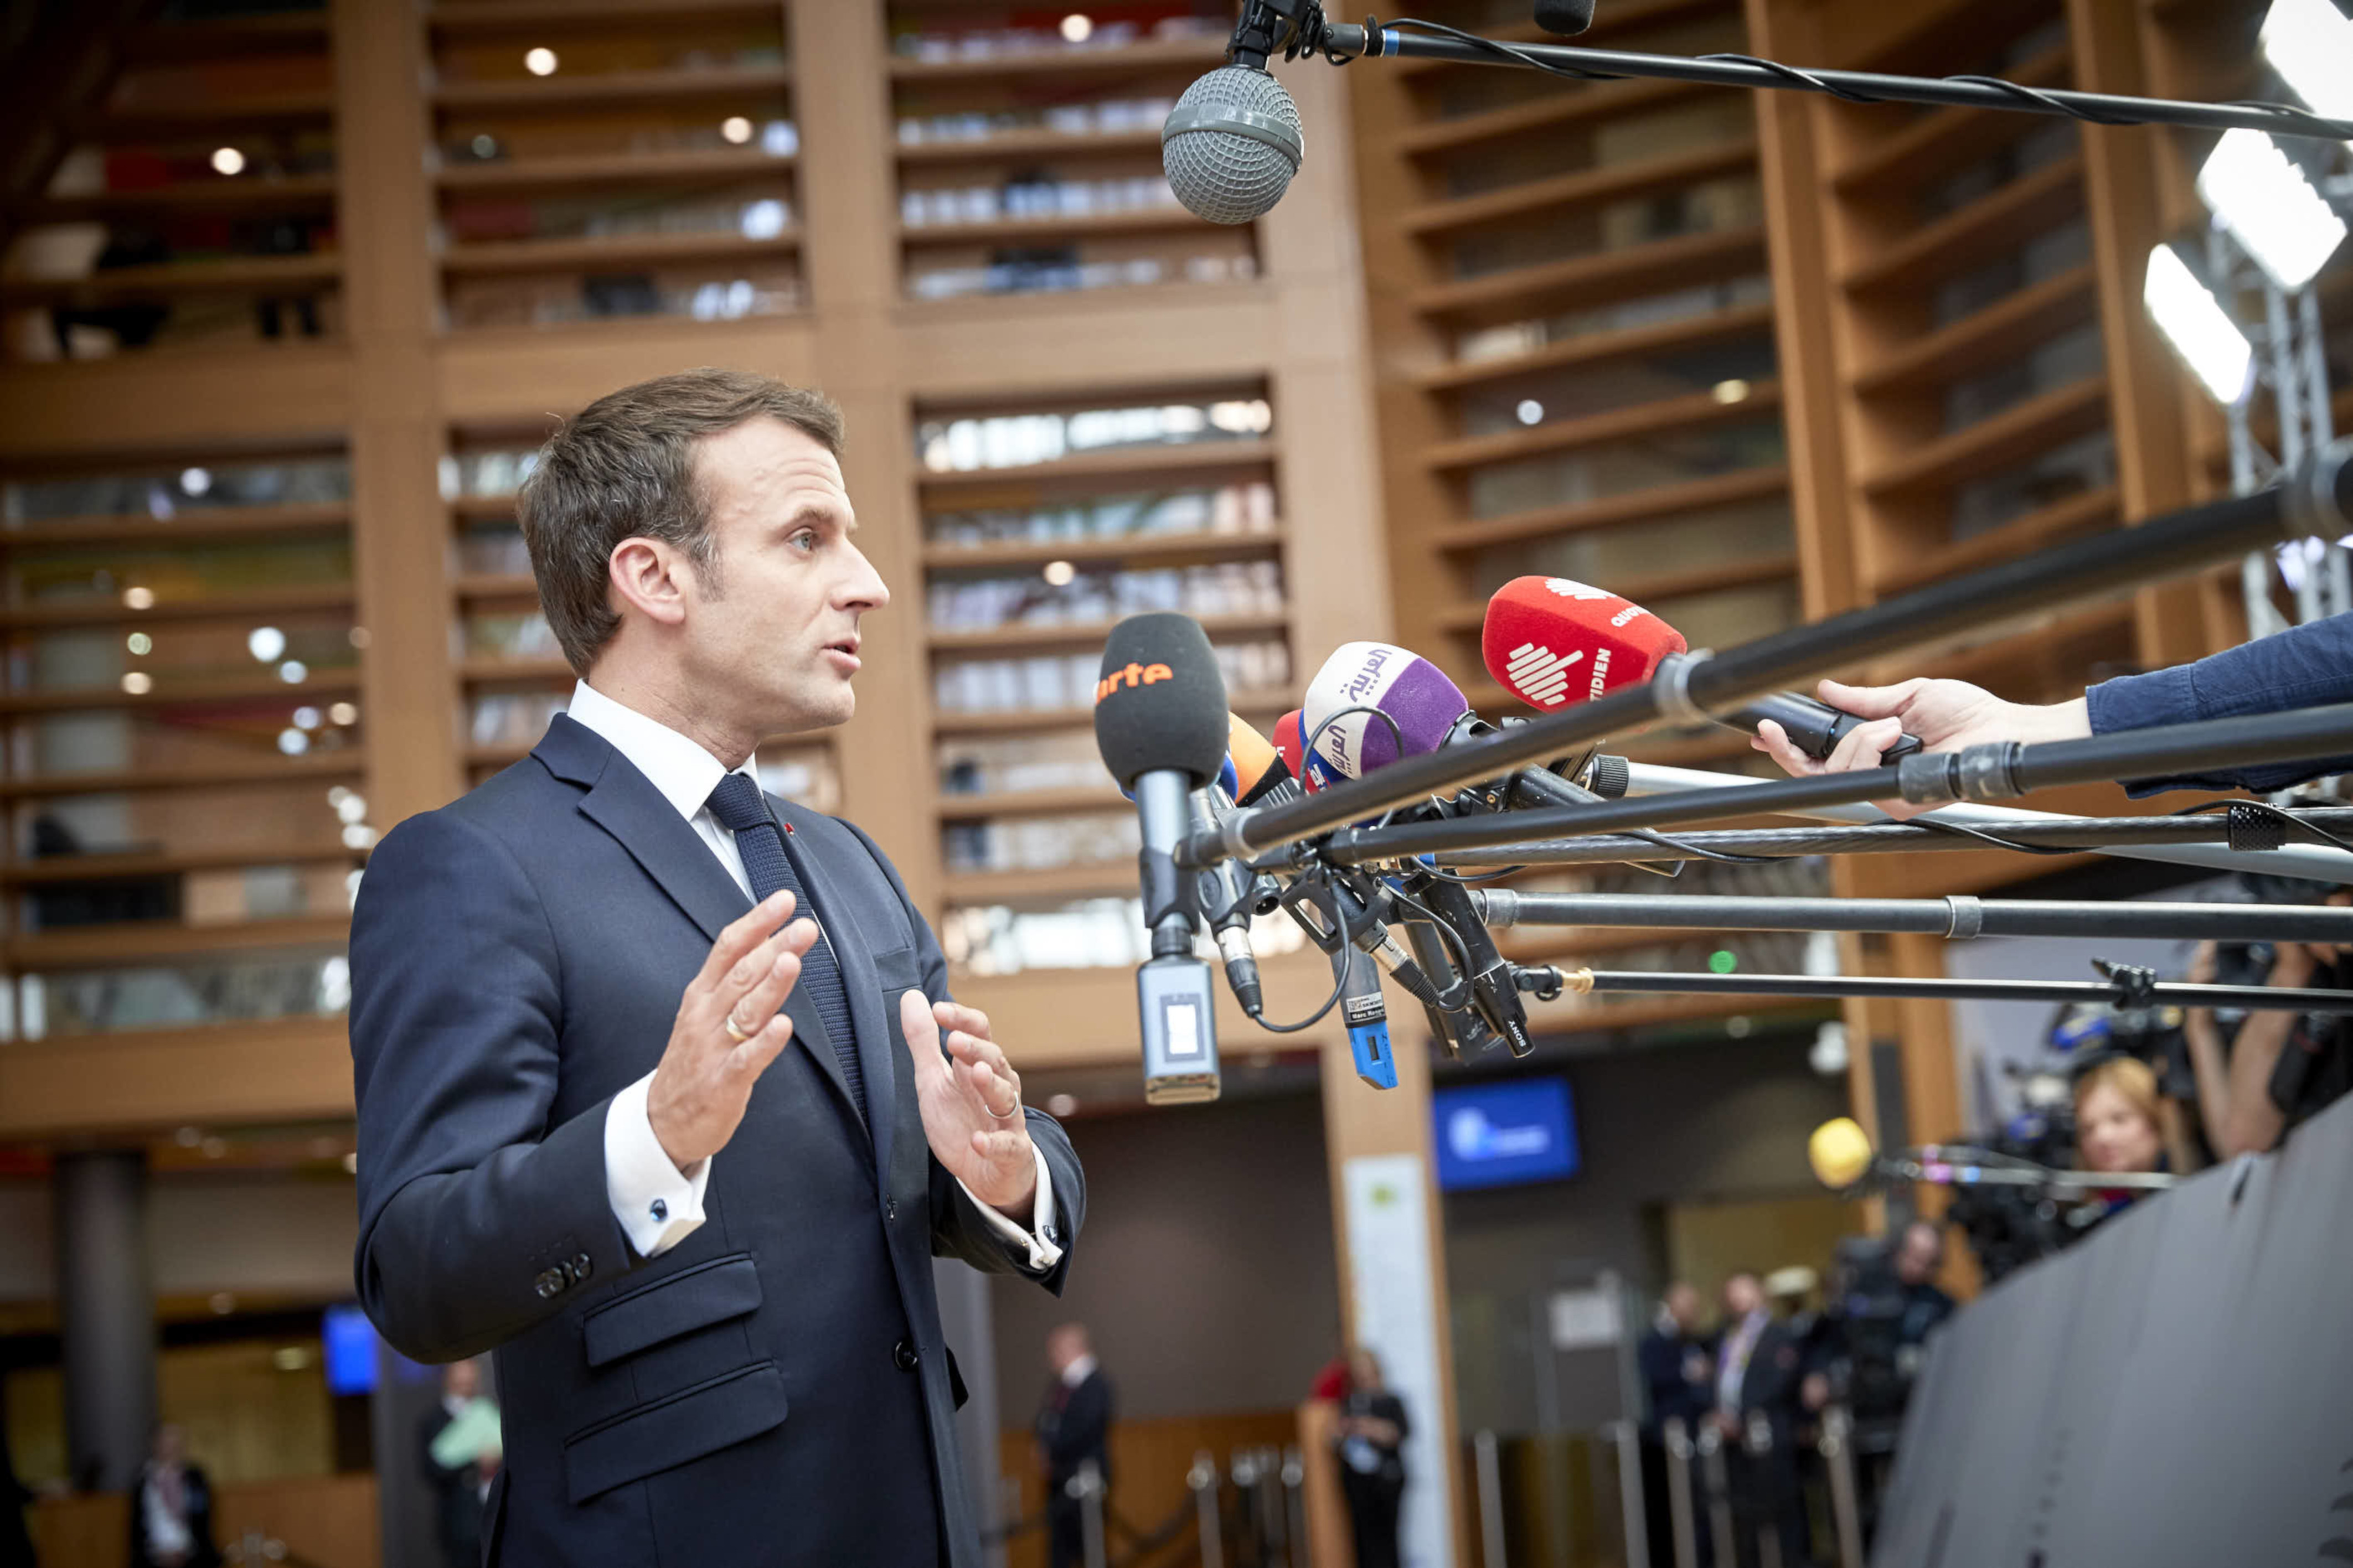 French president Emmanuel Macron speaks to the press in Brussels on May 28, 2019 (ACN/Blanca Blay)